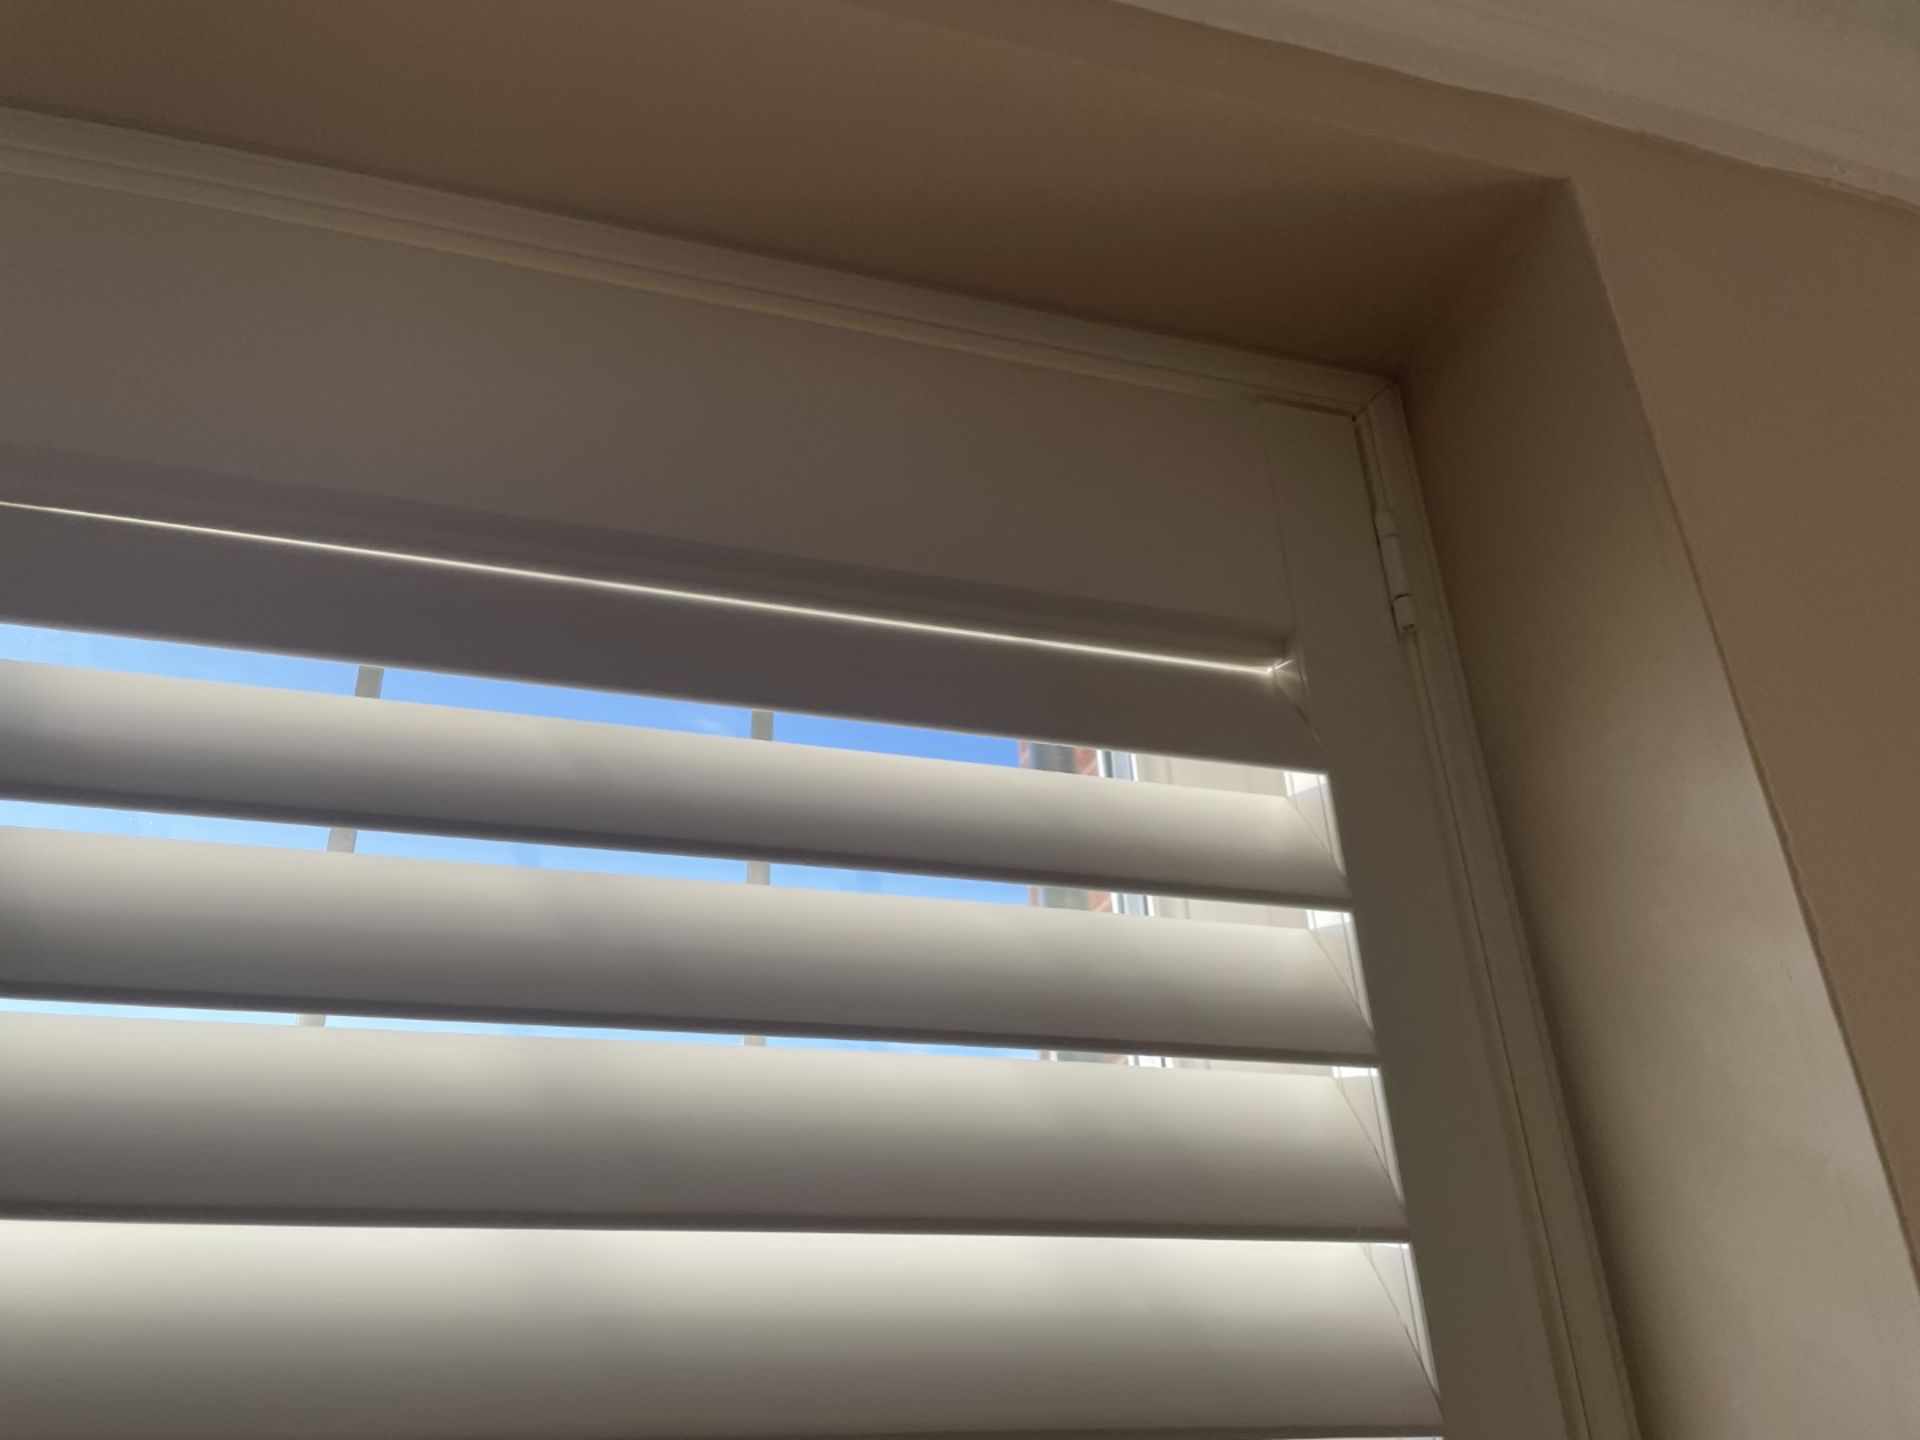 1 x Hardwood Timber Double Glazed Window Frames fitted with Shutter Blinds, In White - Ref: PAN105 - Image 7 of 11